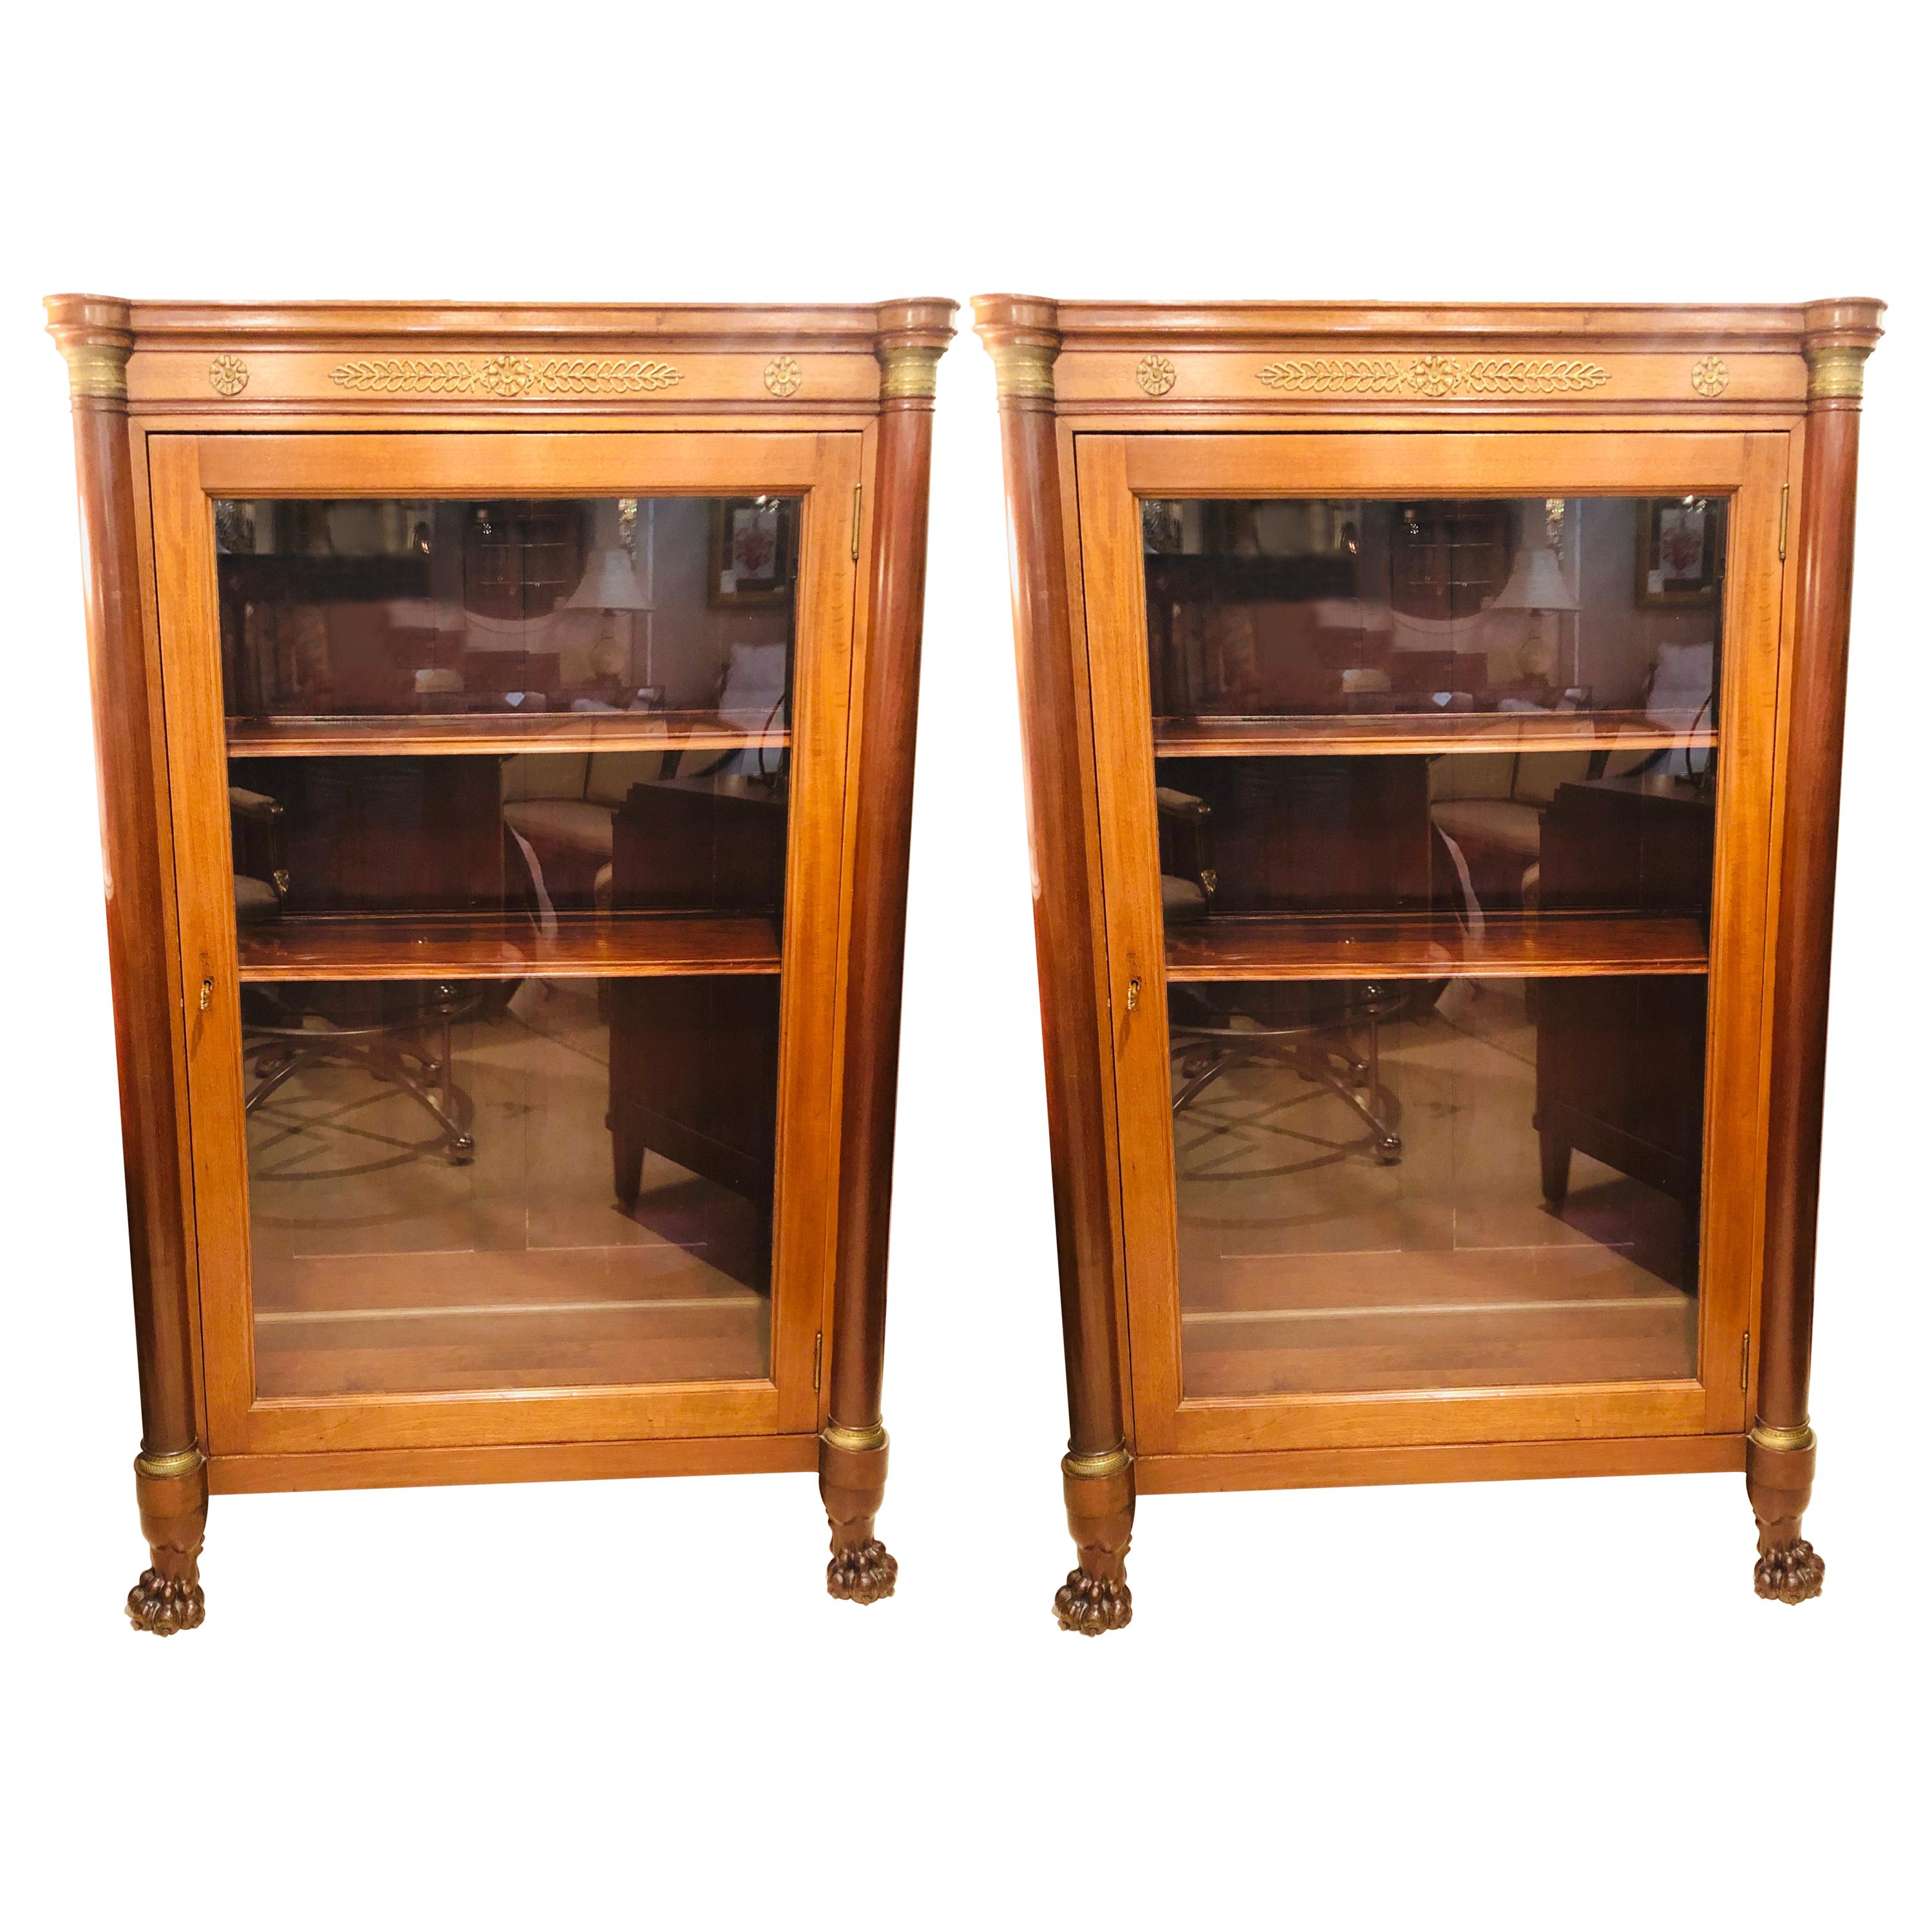 Late 19th Century Empire Style Bookcase Cabinets with Bronze Mounts a Pair